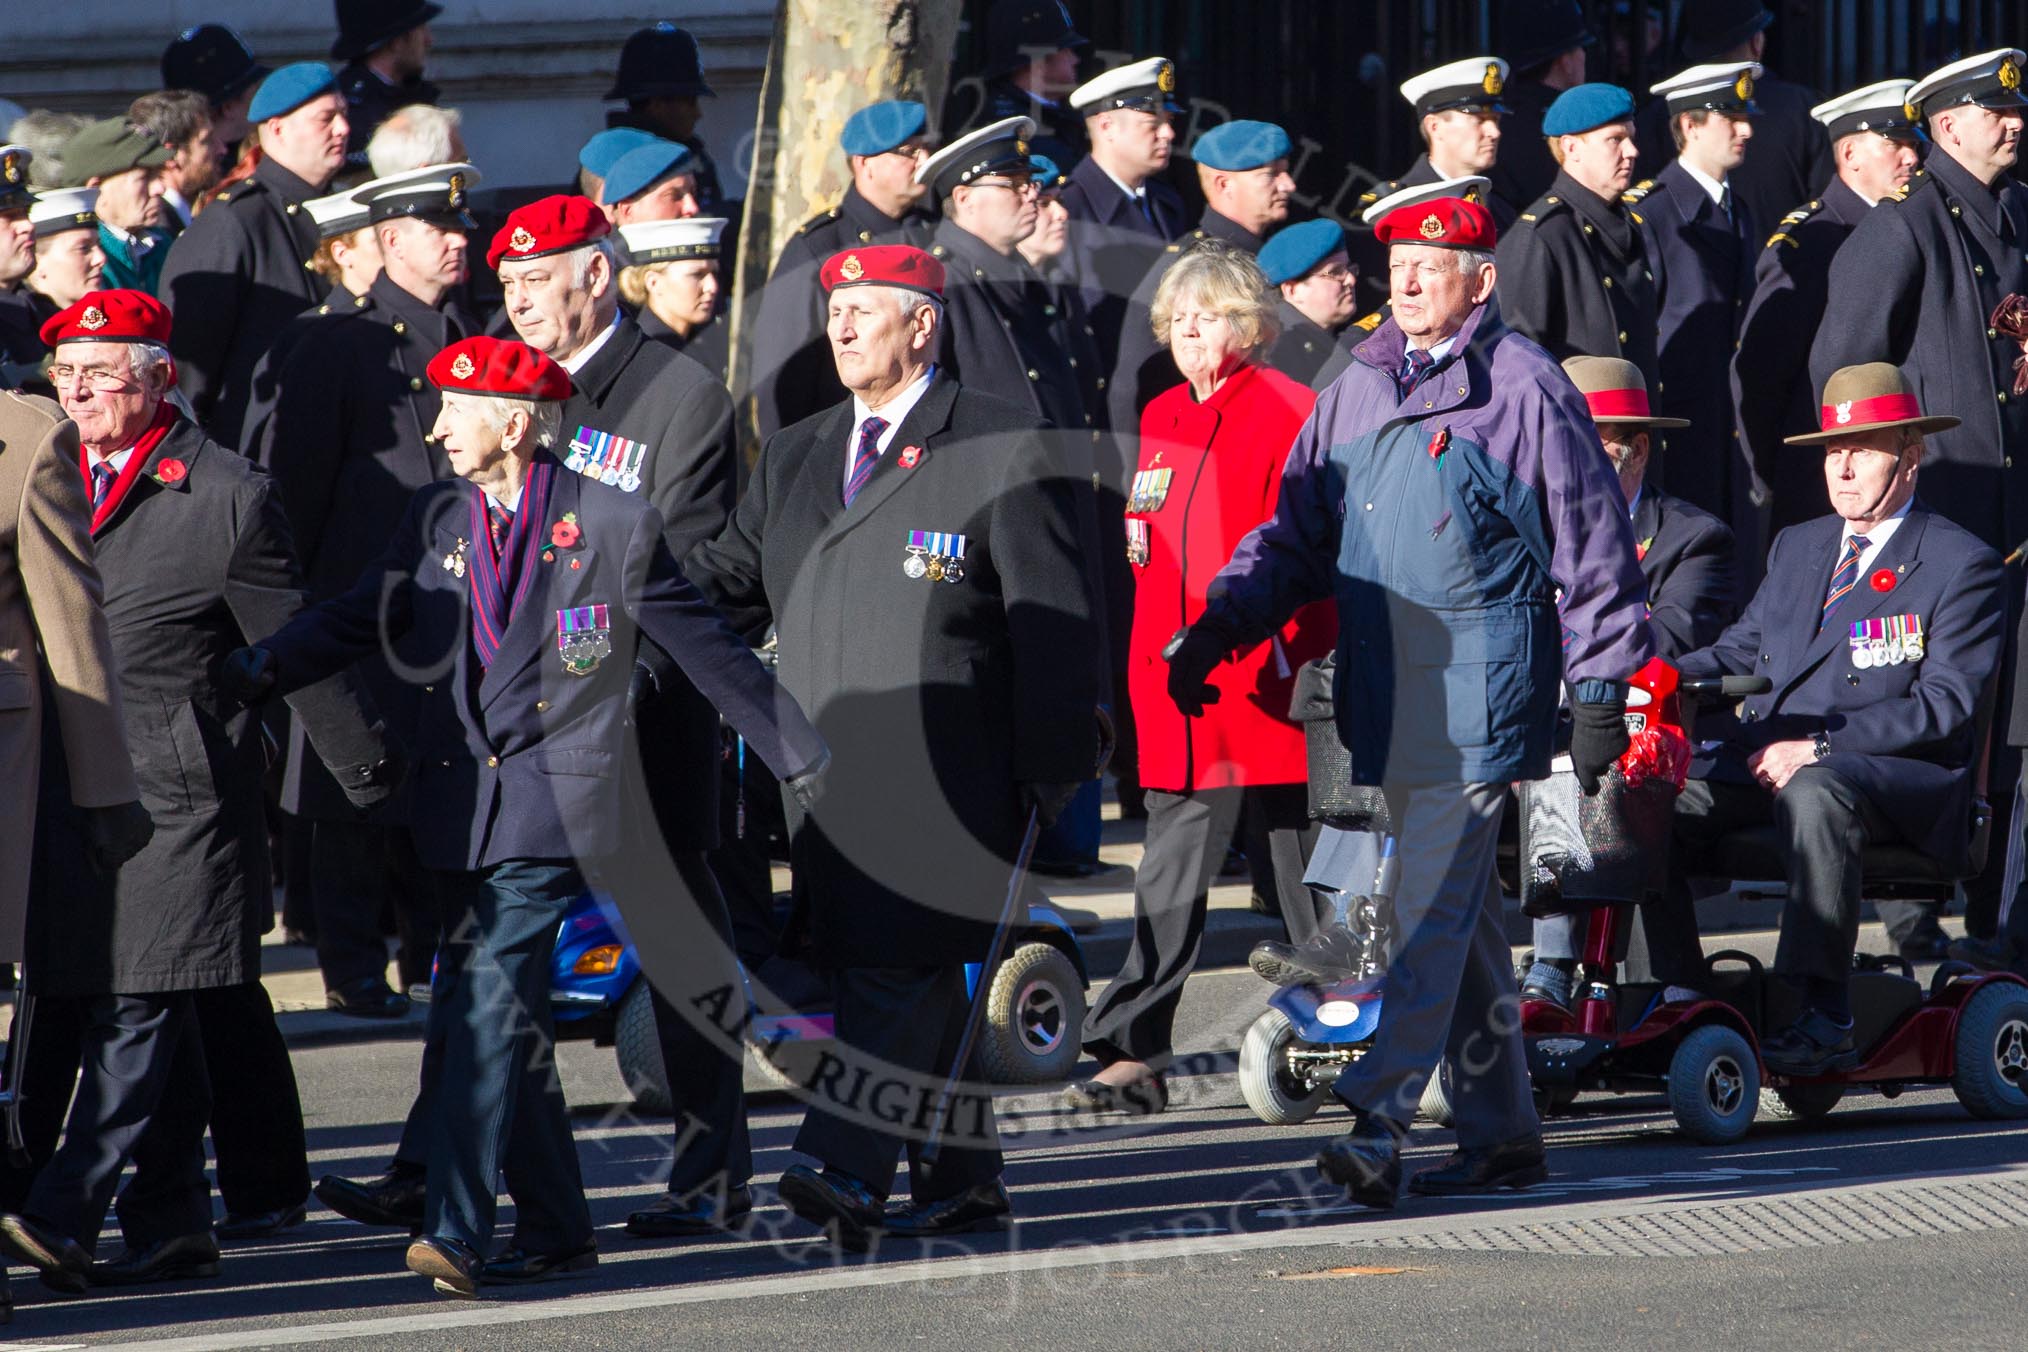 Remembrance Sunday 2012 Cenotaph March Past: Group B3, Royal Military Police Association..
Whitehall, Cenotaph,
London SW1,

United Kingdom,
on 11 November 2012 at 11:55, image #833